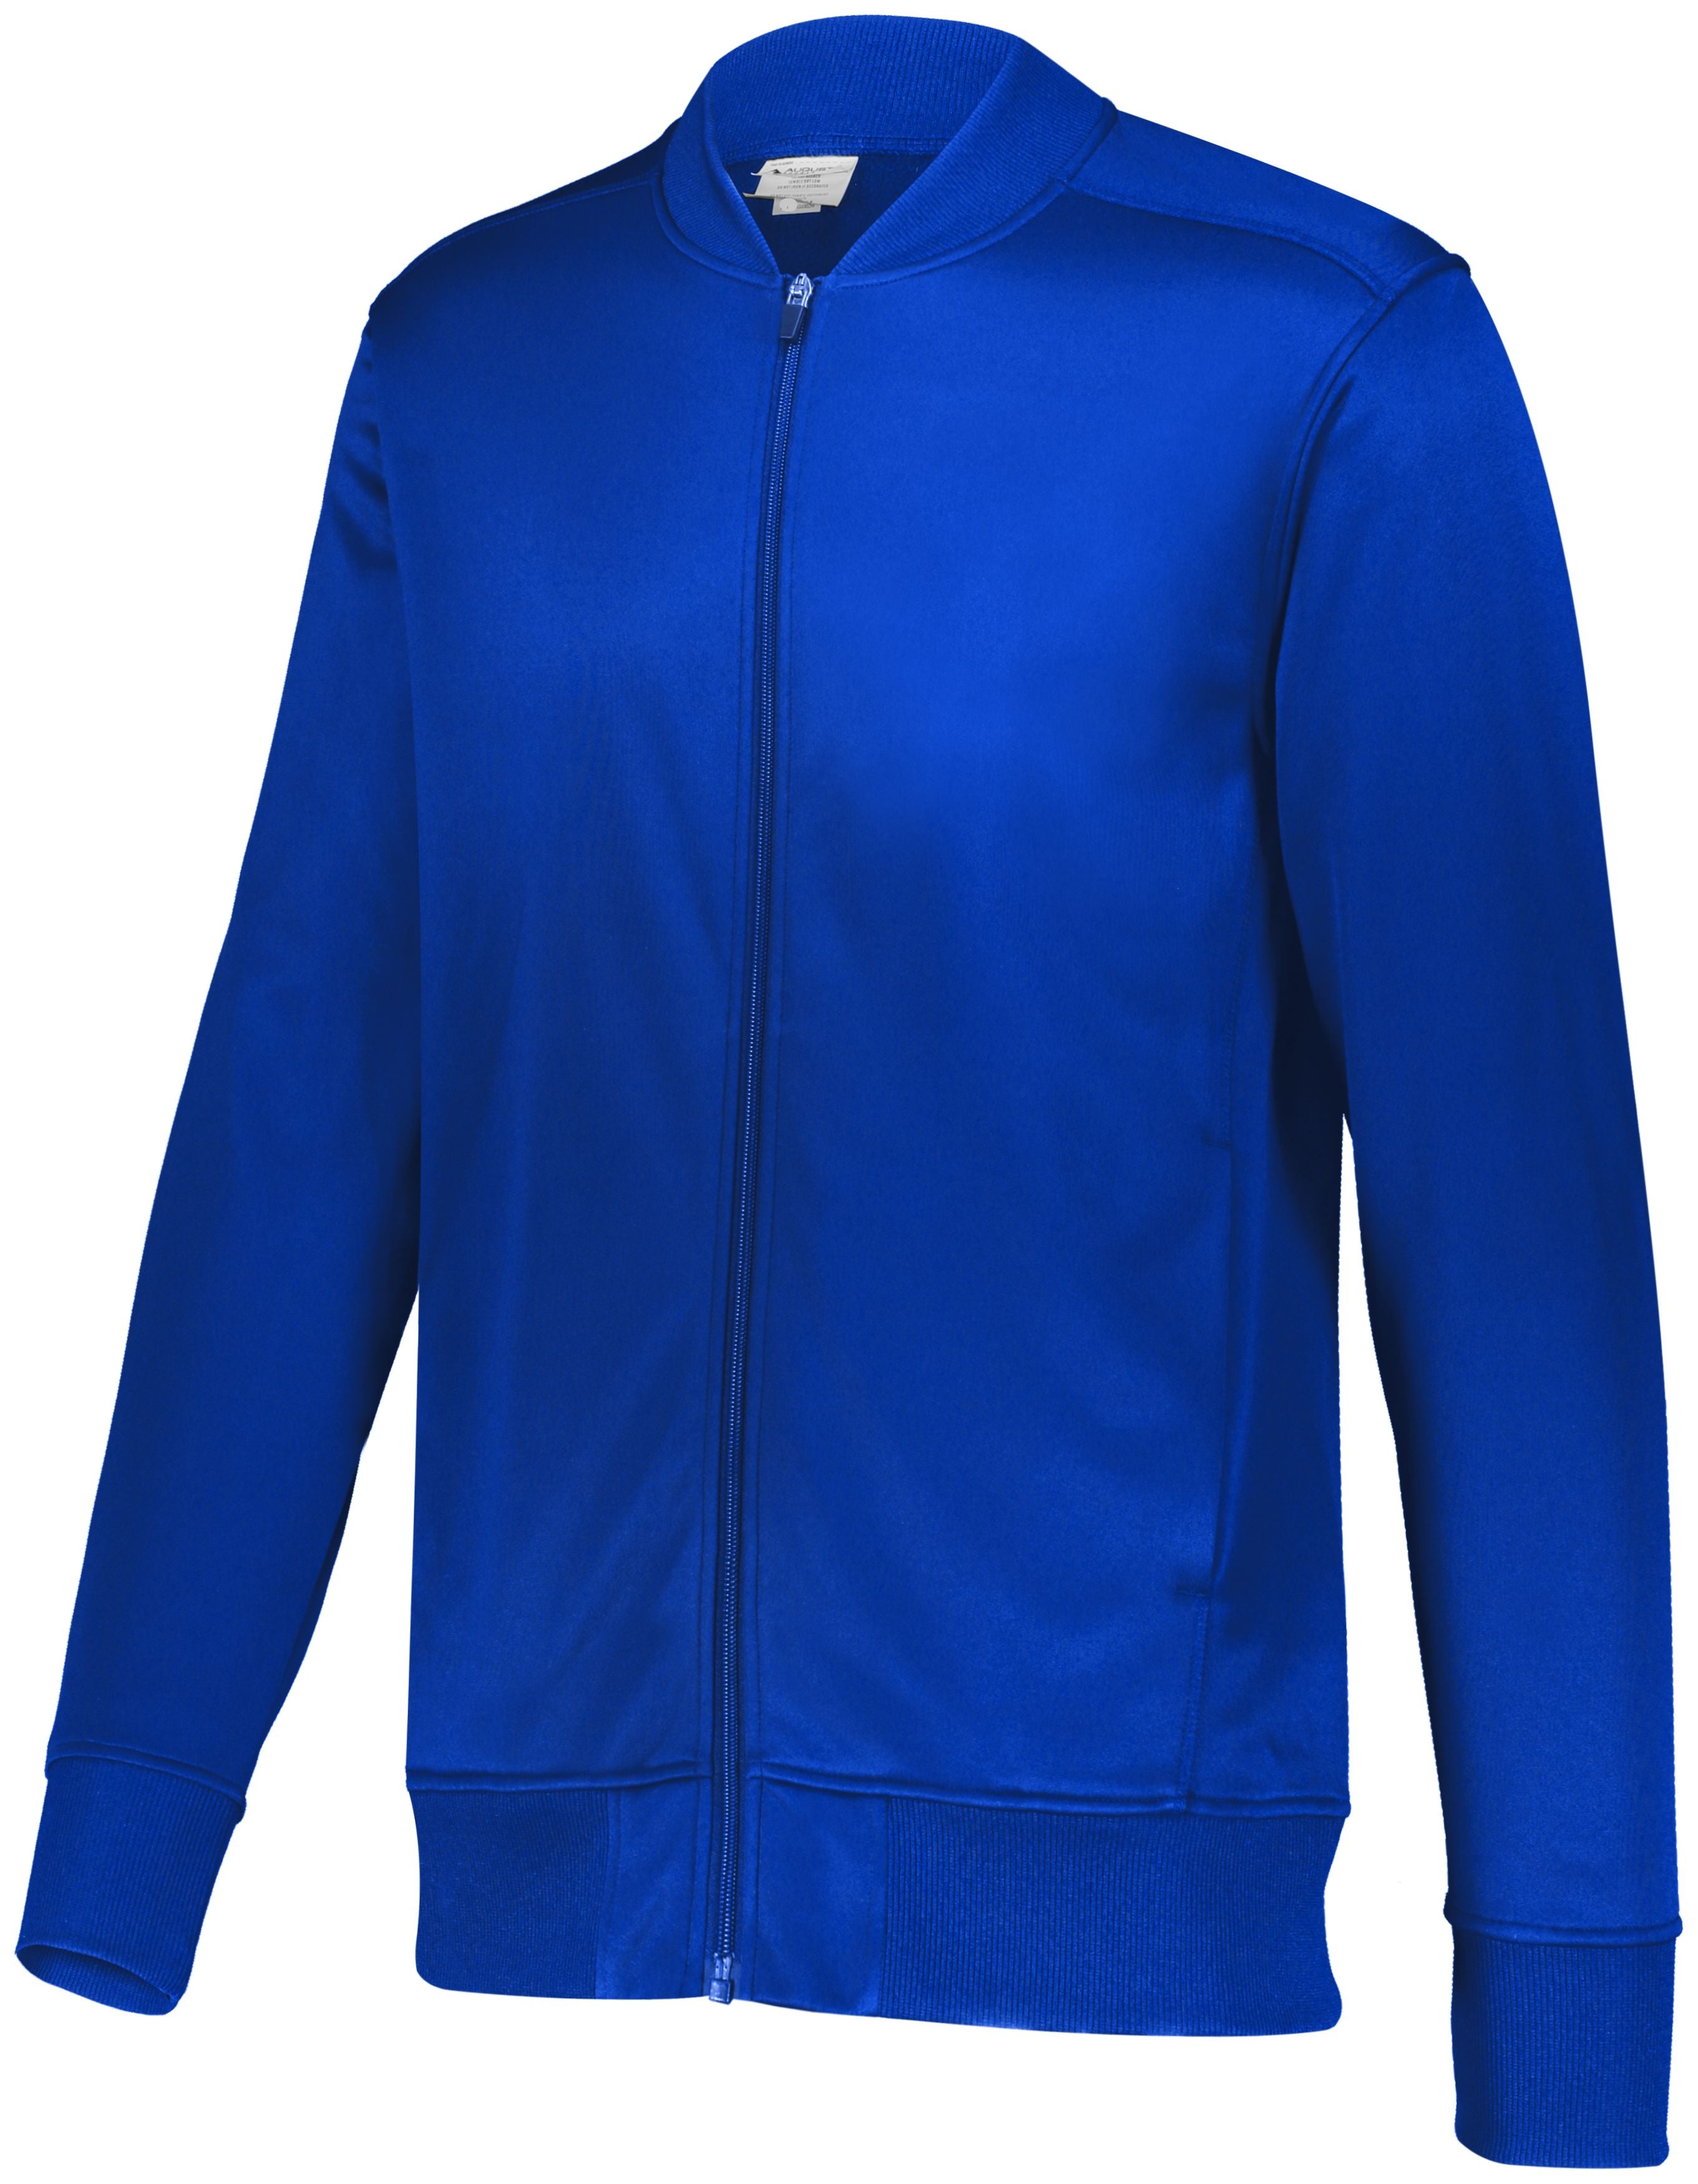 Augusta Sportswear Trainer Jacket in Royal  -Part of the Adult, Adult-Jacket, Augusta-Products, Outerwear product lines at KanaleyCreations.com